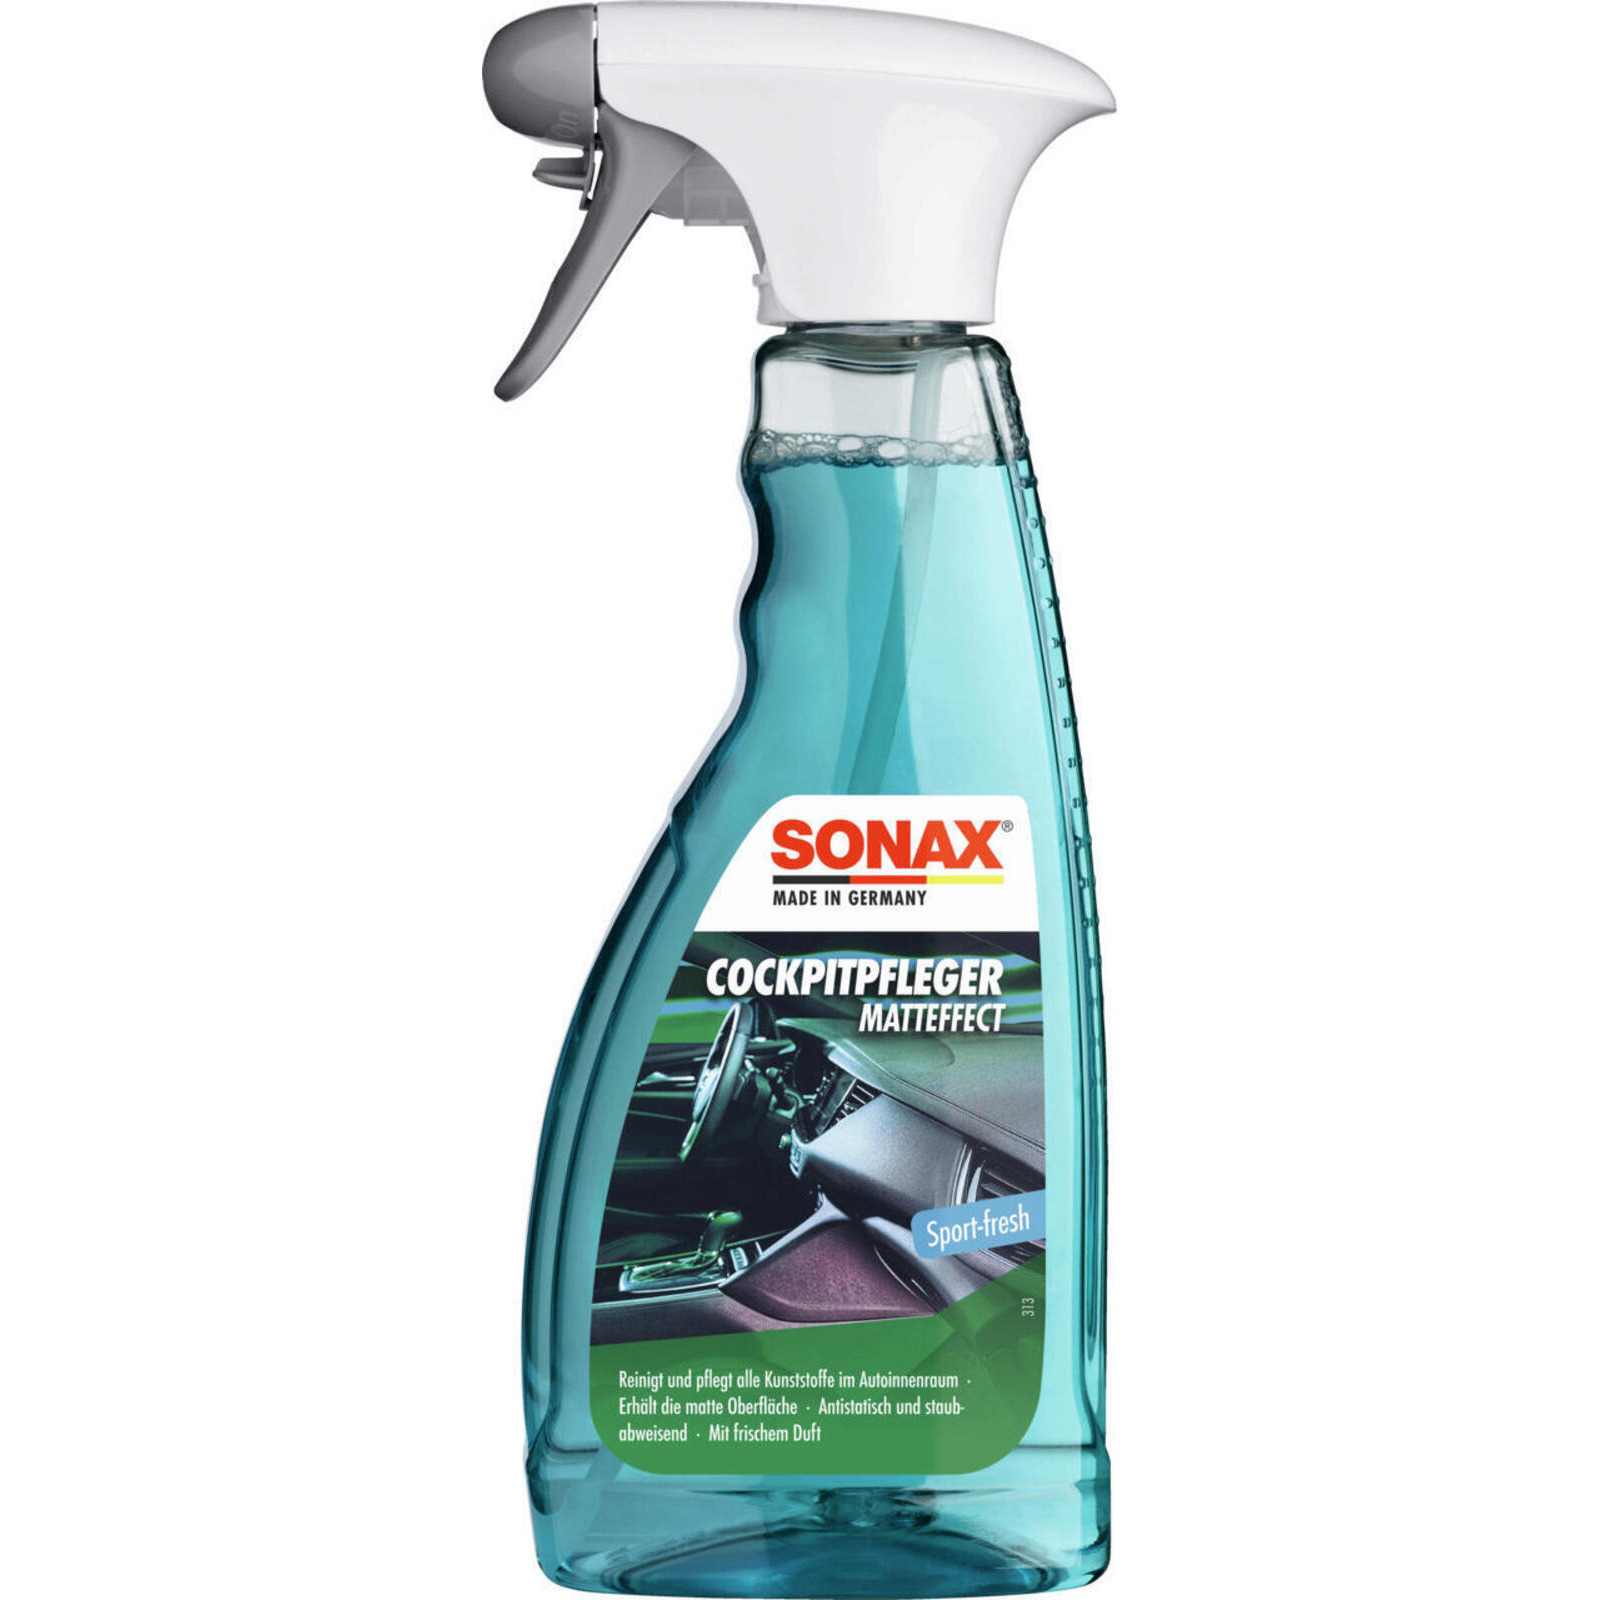 SONAX Synthetic Material Care Products Cockpit spray matt effect sport-fresh